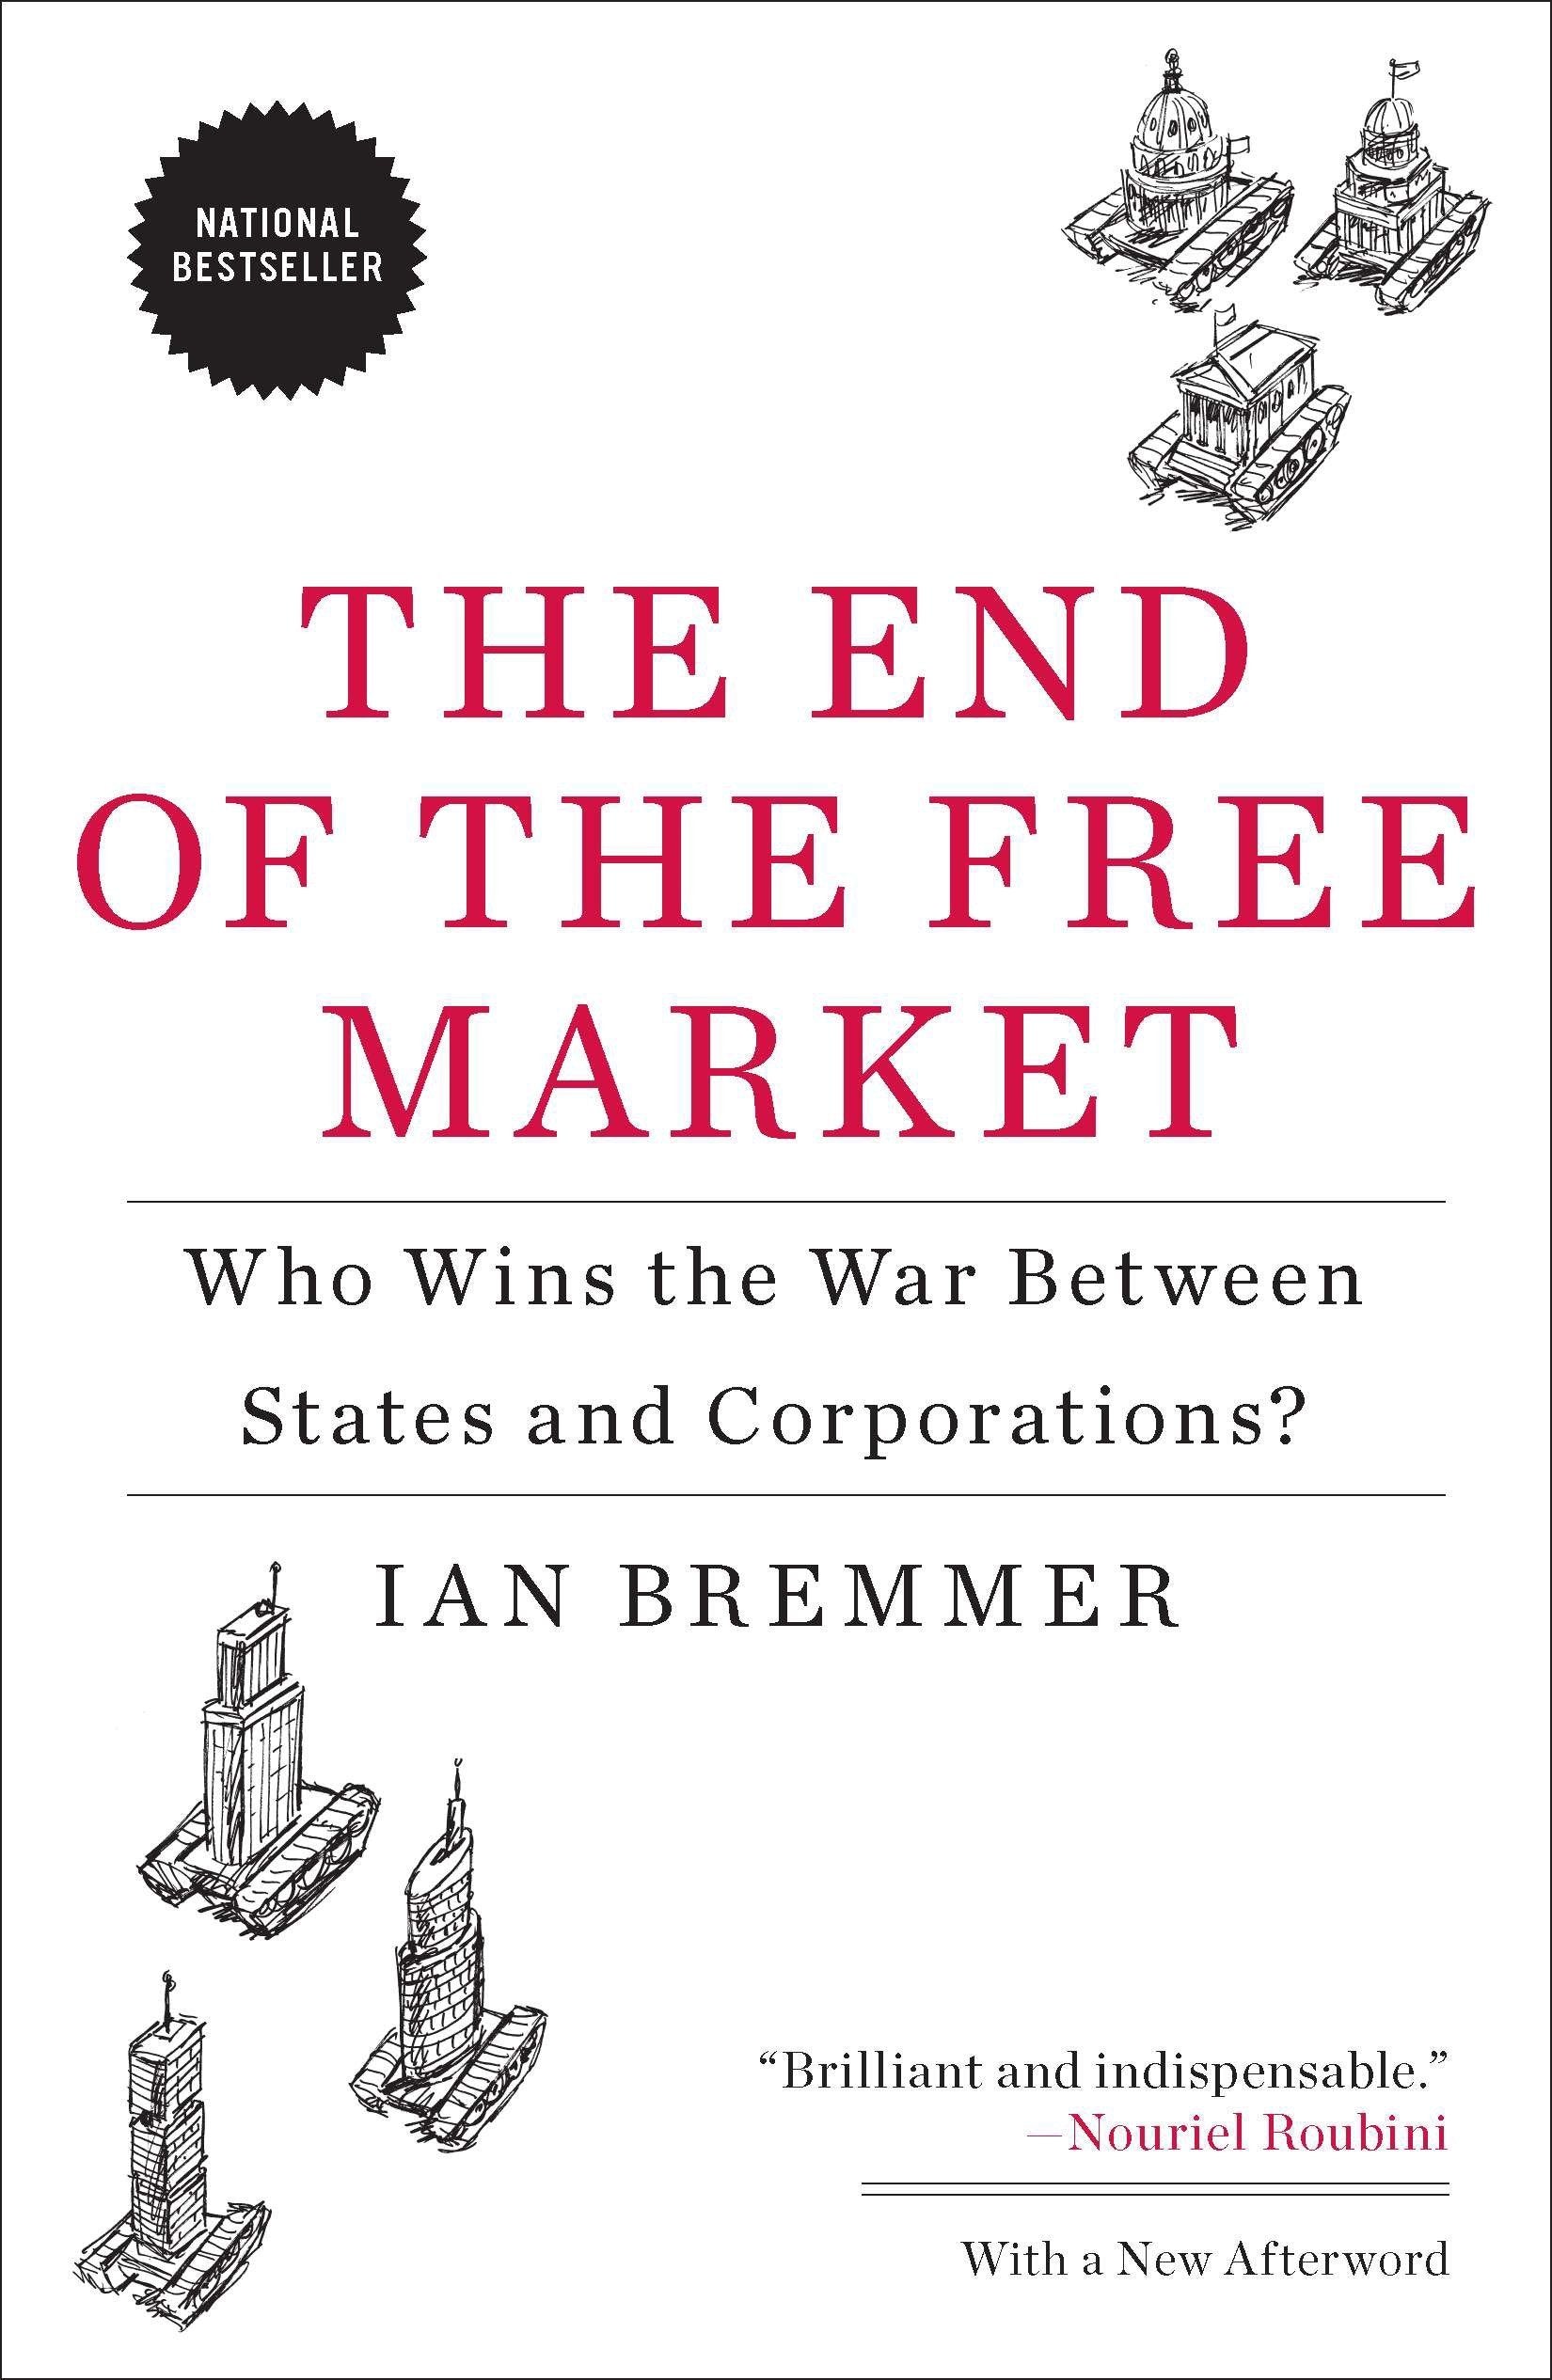 The End of the Free Market: Who Wins the War Between States and Corporations? By Ian Bremmer